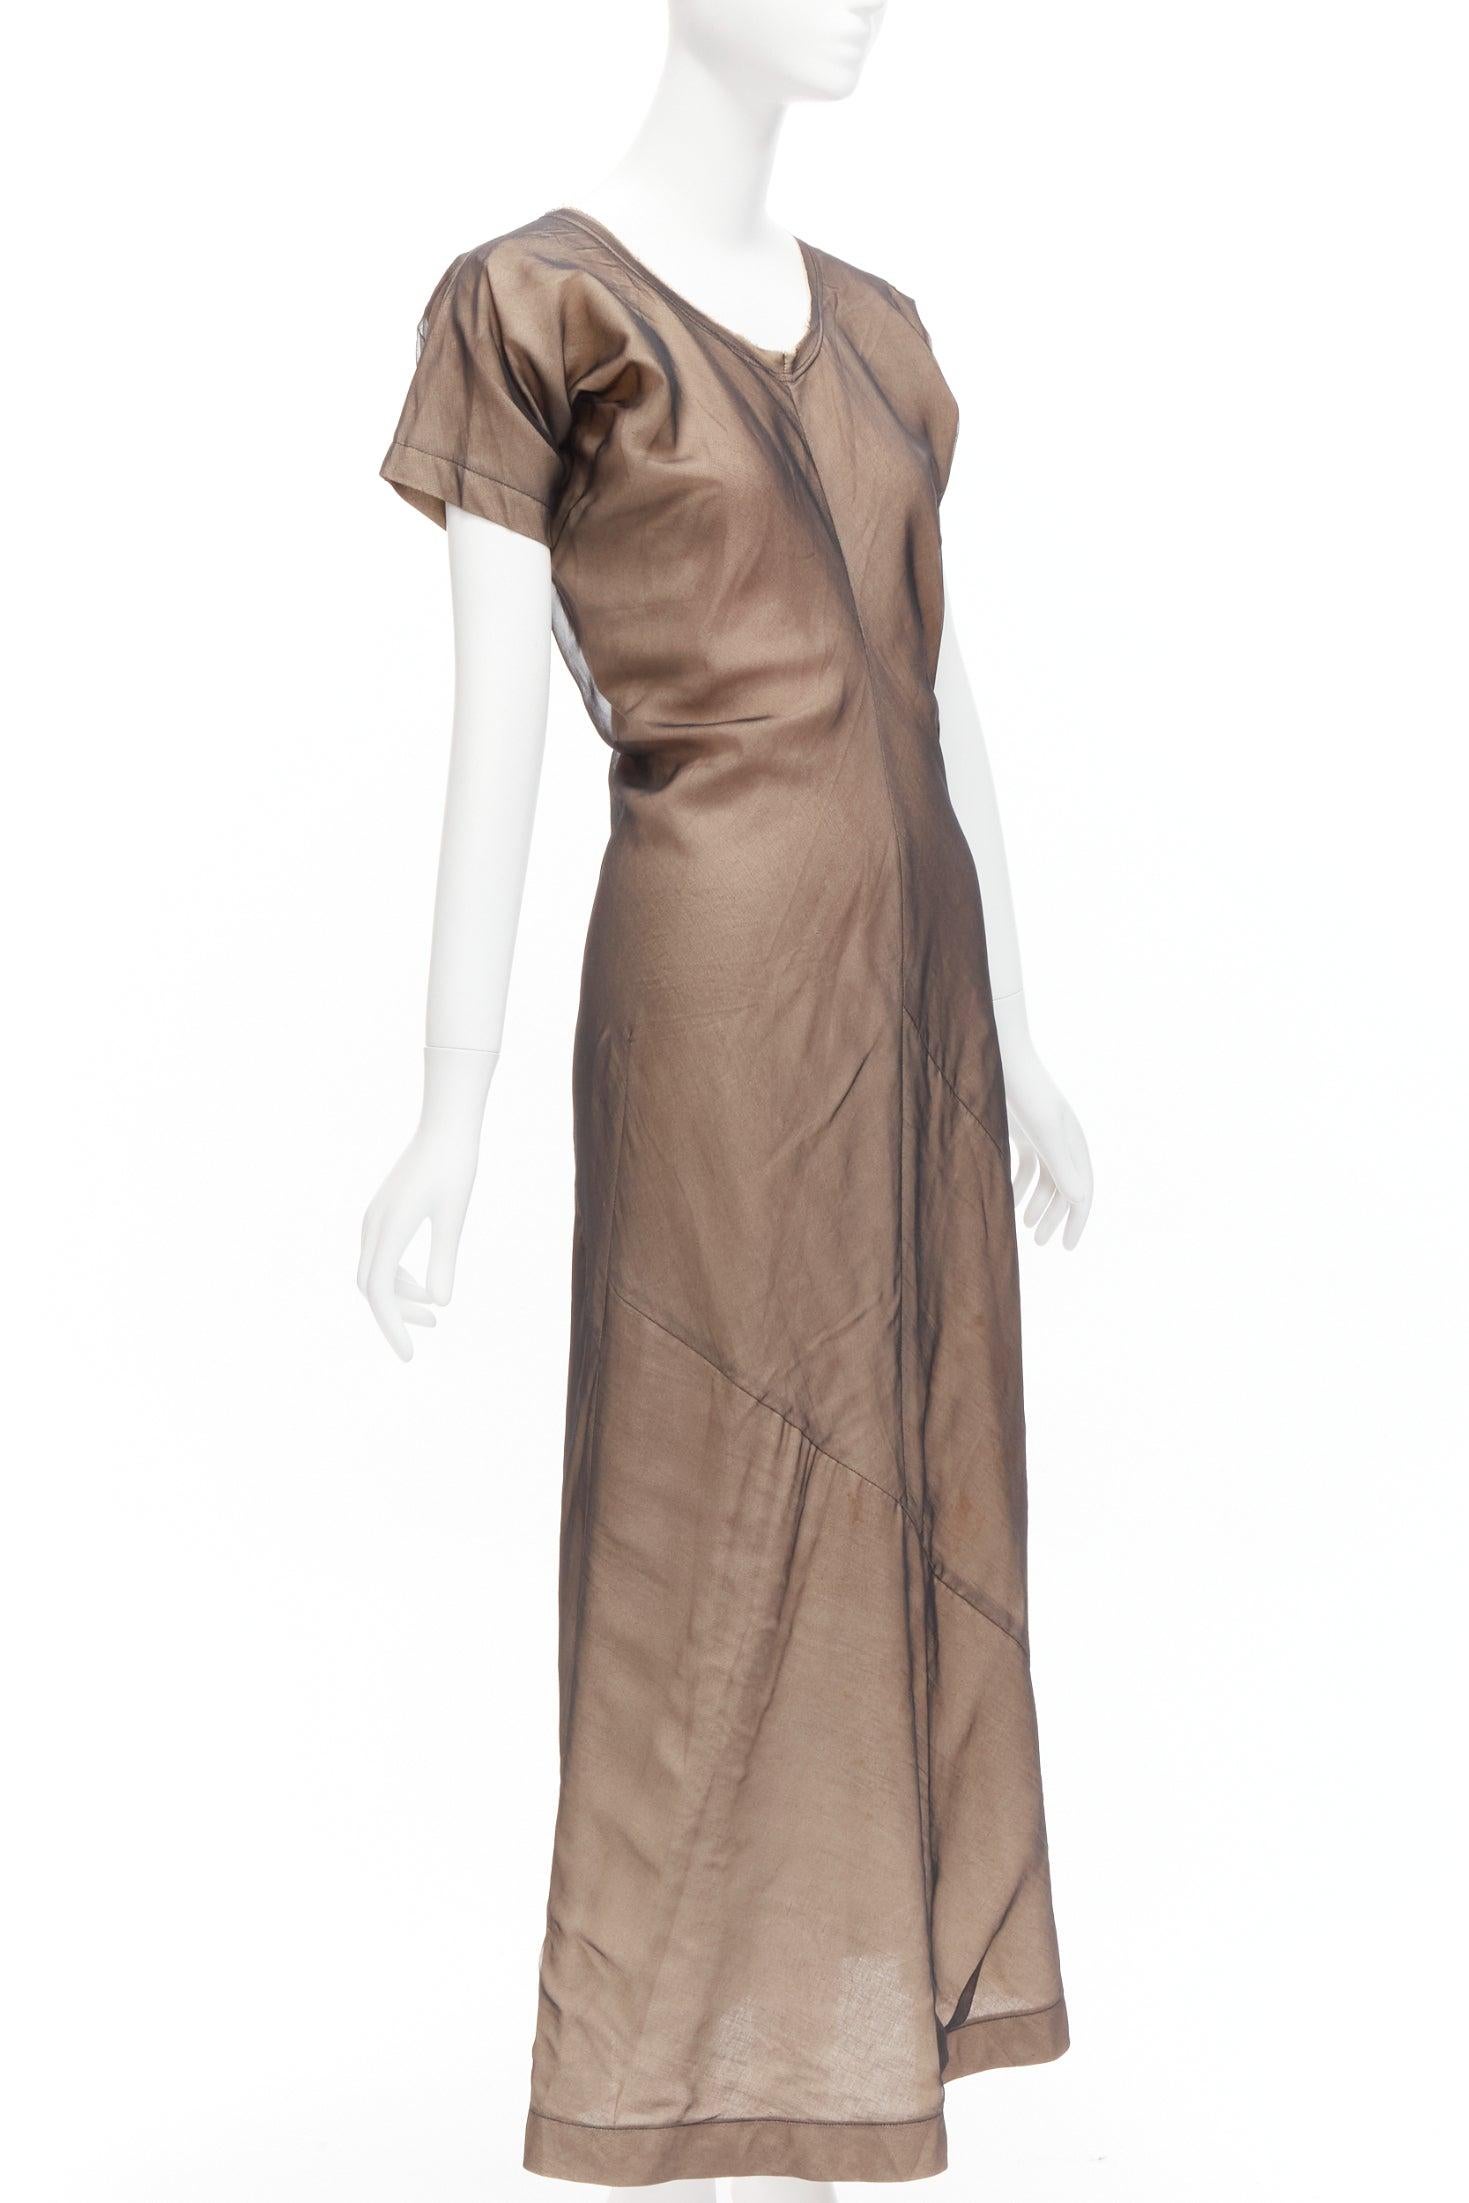 COMME DES GARCONS Vintage nude sheer overlay A-line bias dress S Cindy Sherman In Fair Condition For Sale In Hong Kong, NT